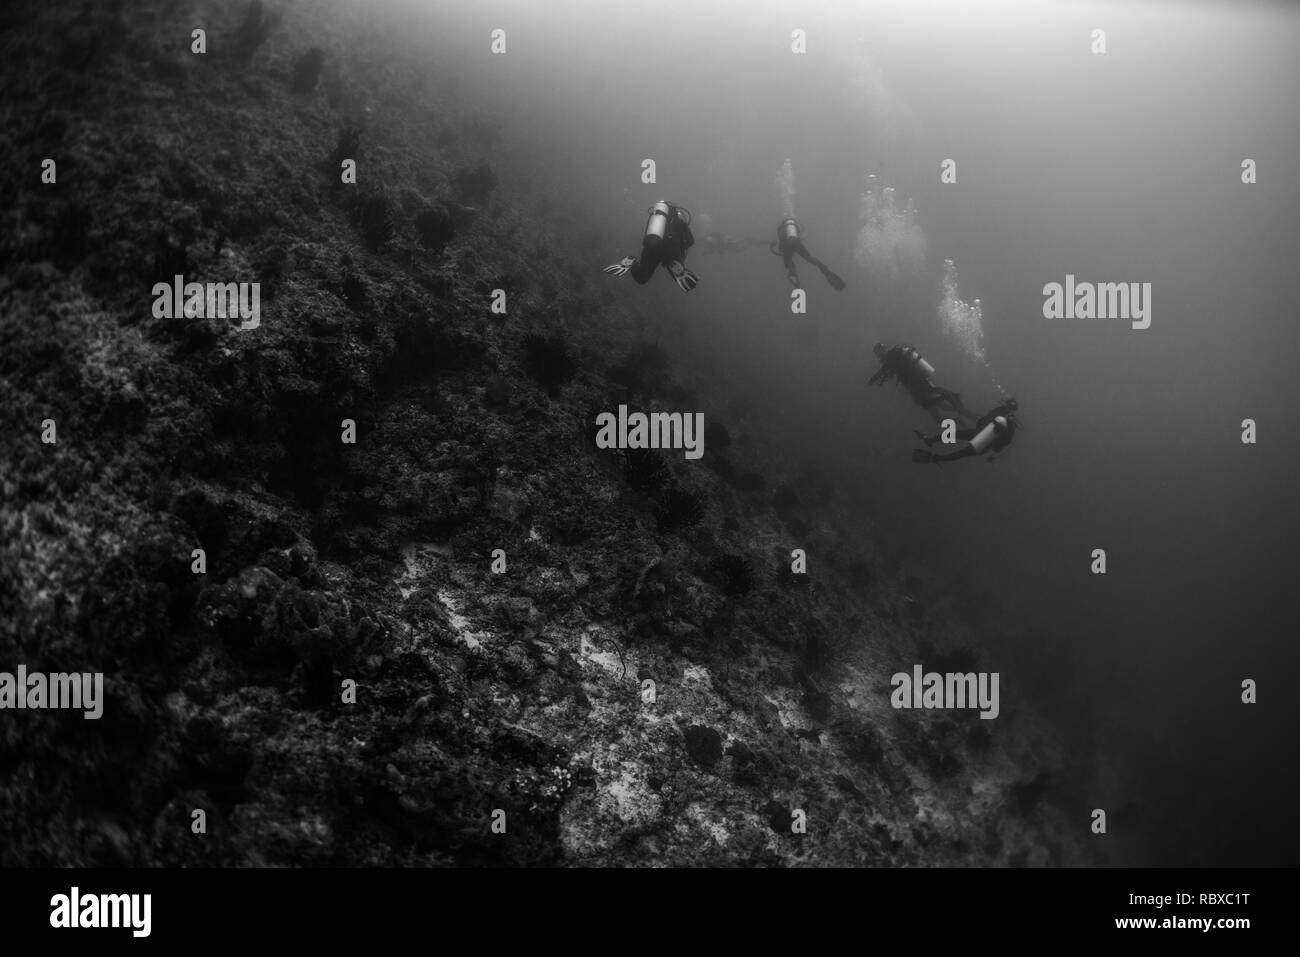 Divers indian ocean Black and White Stock Photos & Images - Alamy